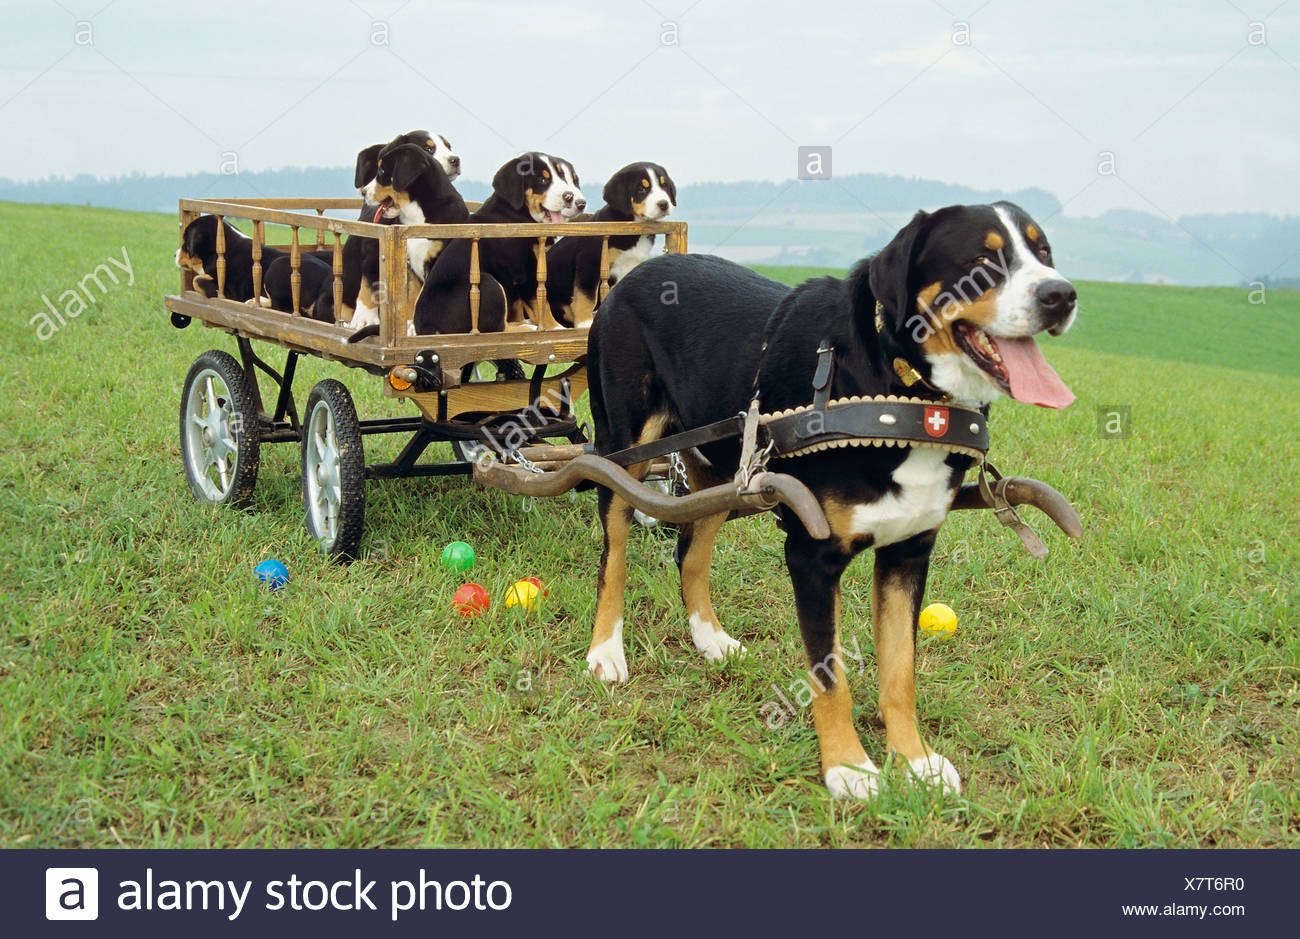 Greater Swiss Mountain Dog With Puppies In Hay Cart Stock Photo Alamy